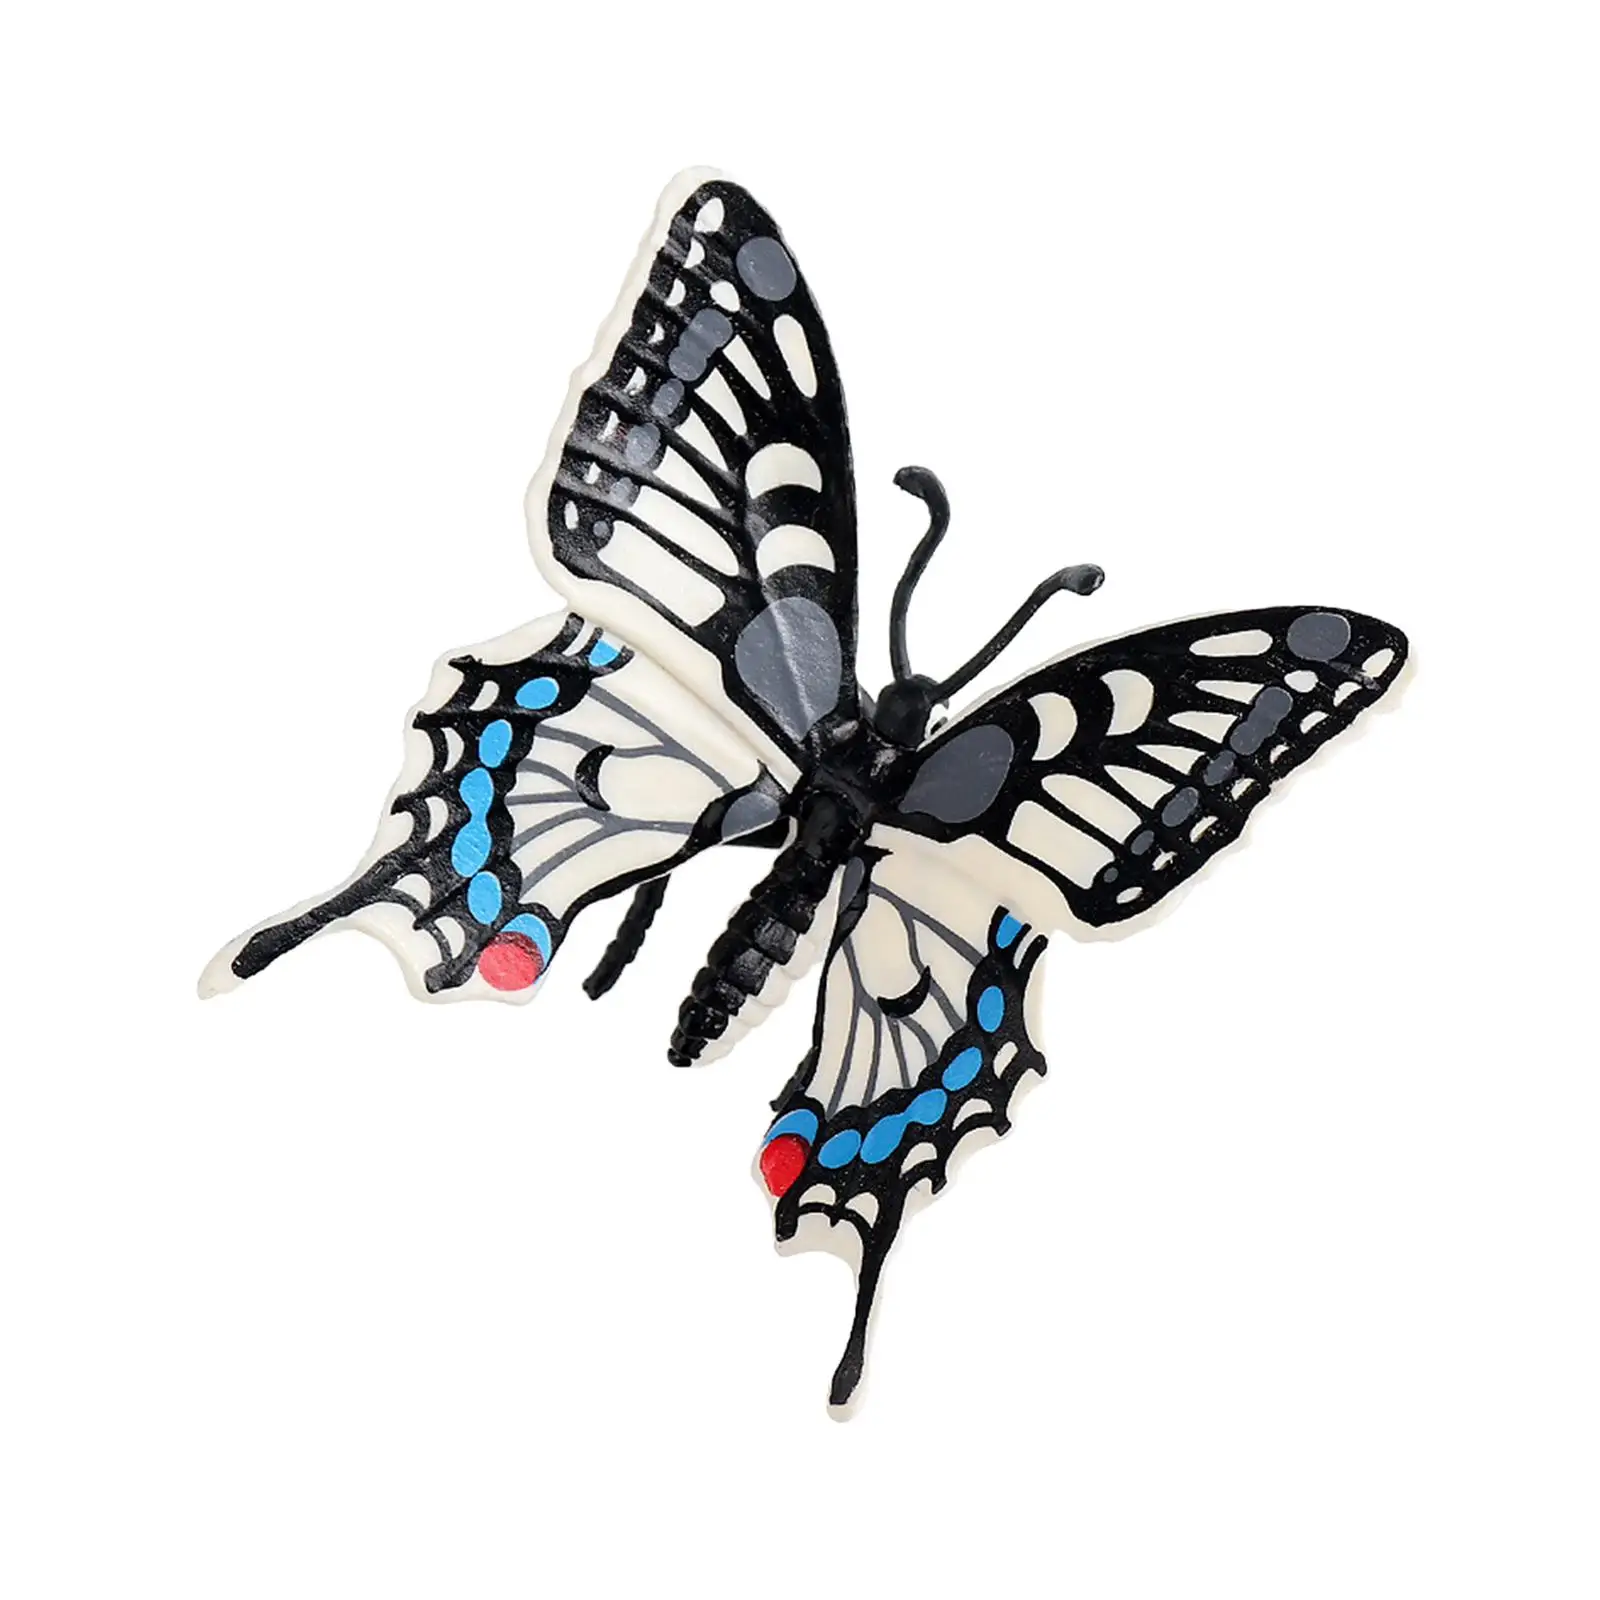 Butterfly Animal Model Realistic Swallowtail Butterfly for Bath Toys Photo Props Party Favors Cake Toppers Teaching Aids